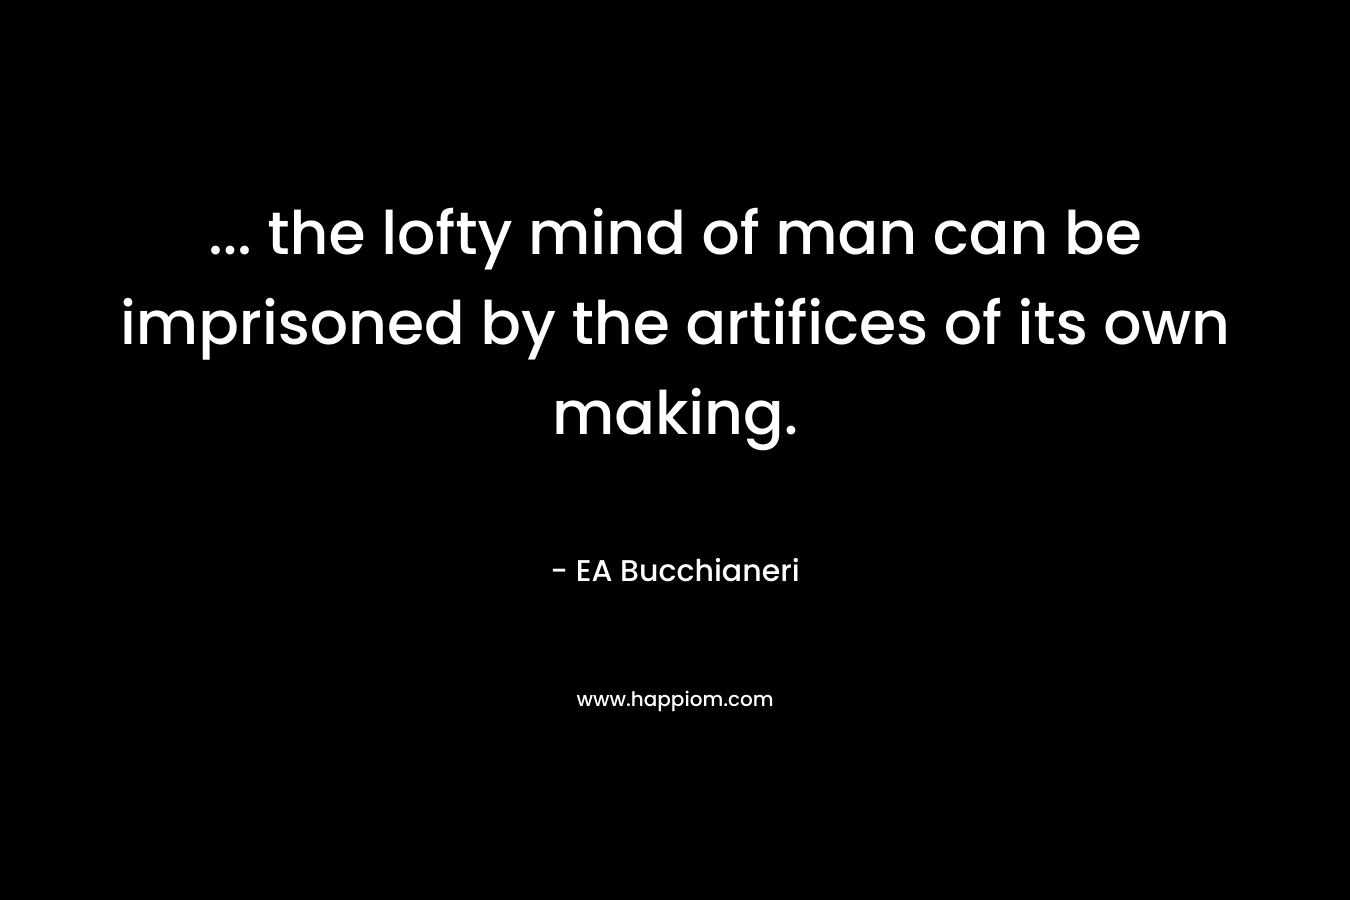 … the lofty mind of man can be imprisoned by the artifices of its own making. – EA Bucchianeri